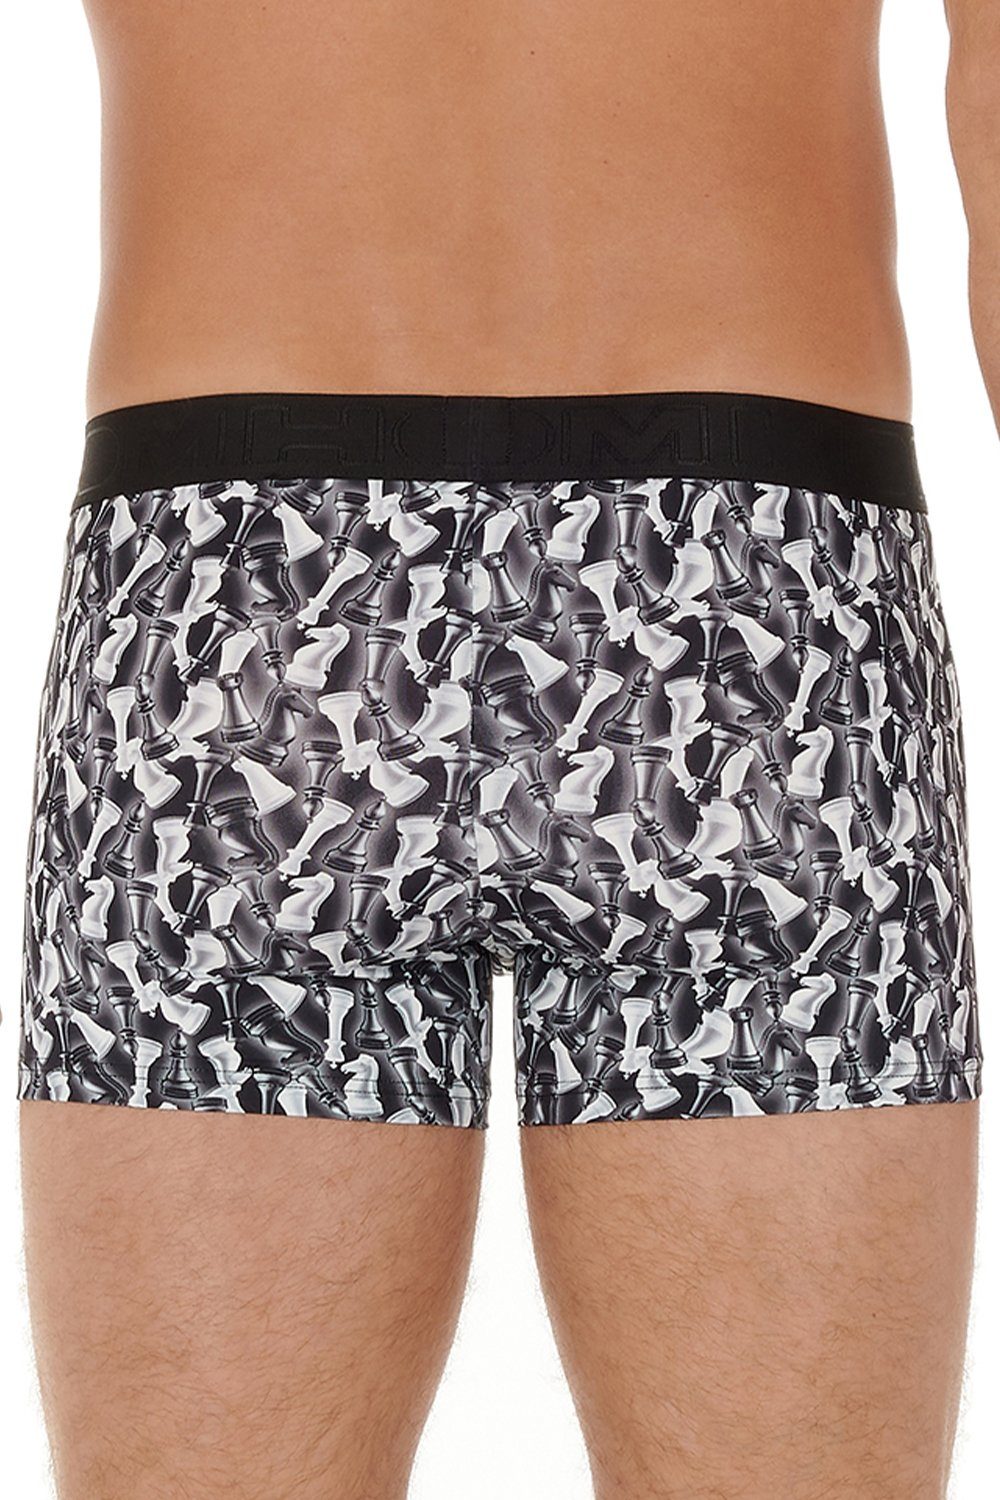 Briefs Chess Hom Hipster 402671 Boxer